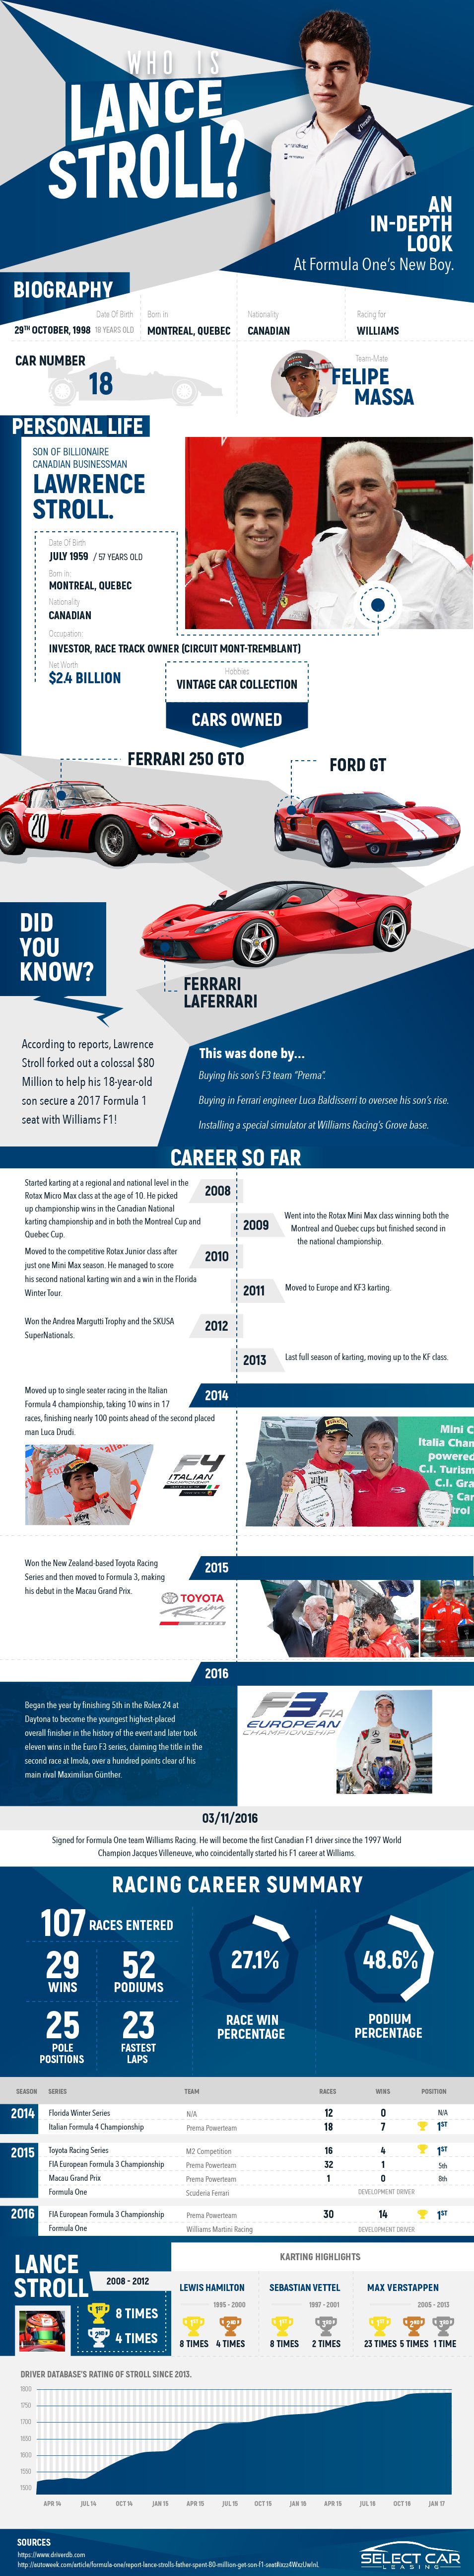 Who is Lance Stroll?